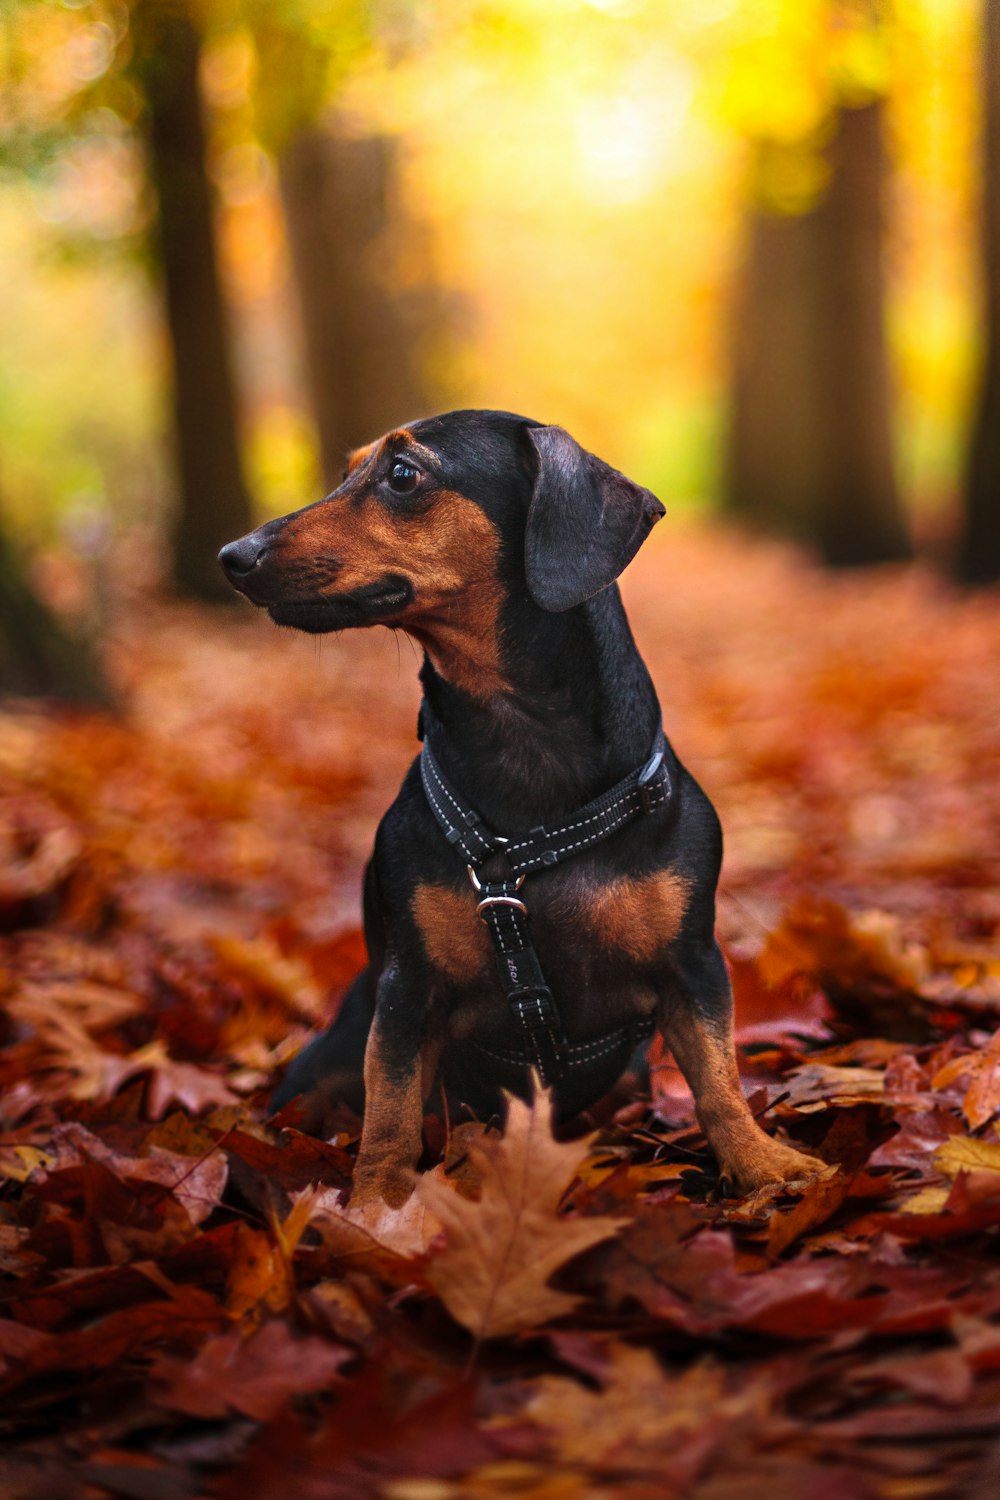 black and tan short coat small dog on brown dried leaves